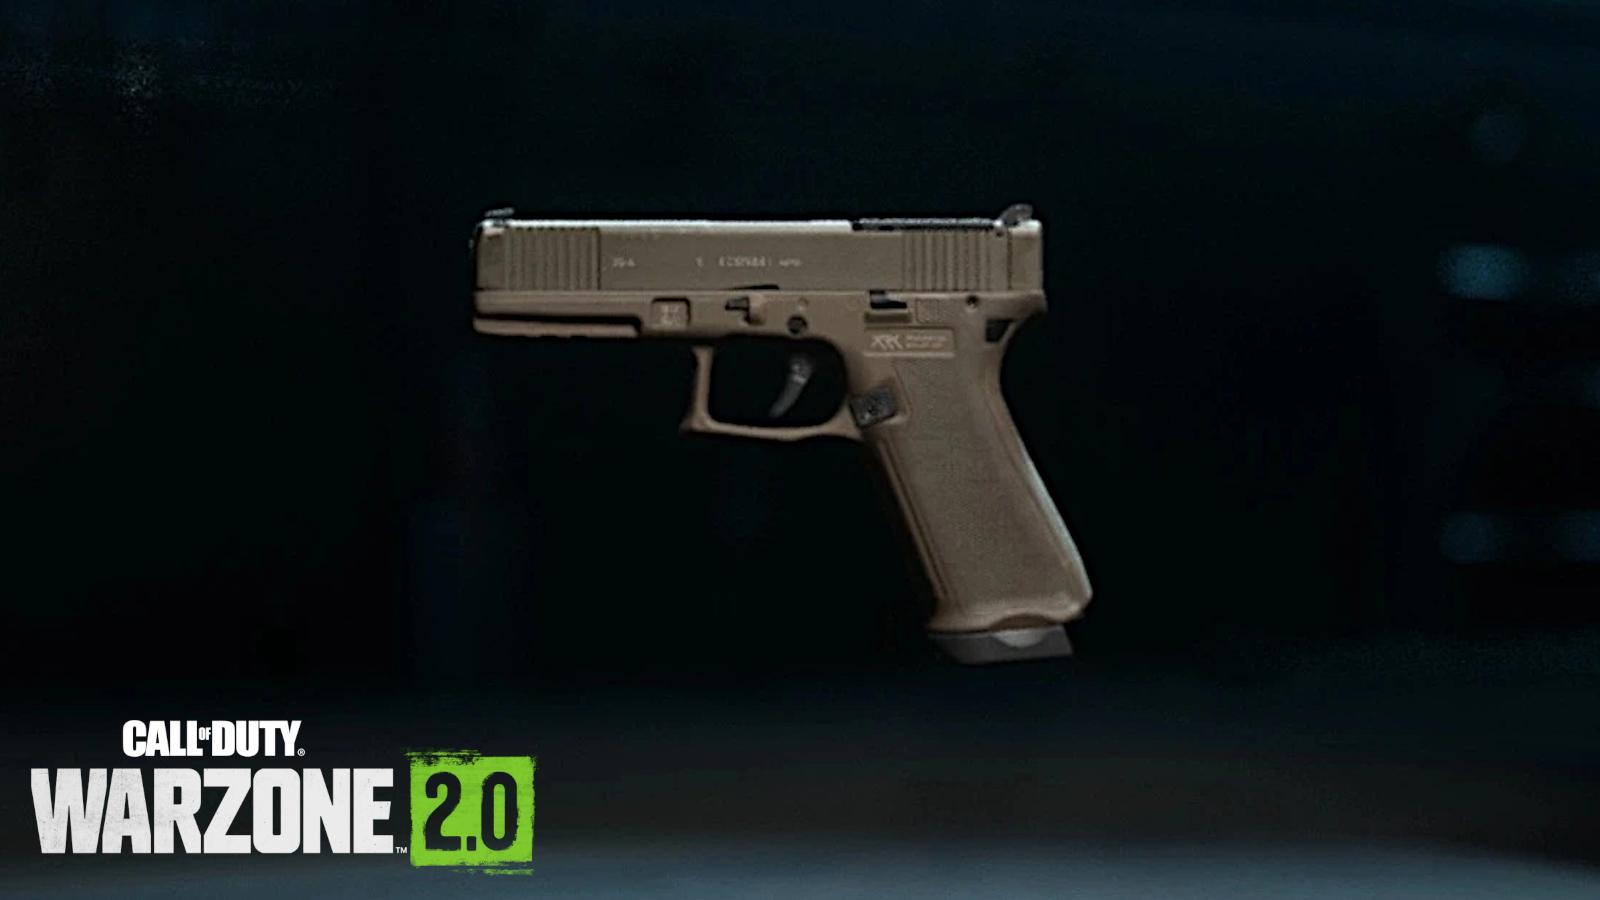 X13 automatic pistol from Warzone 2.0